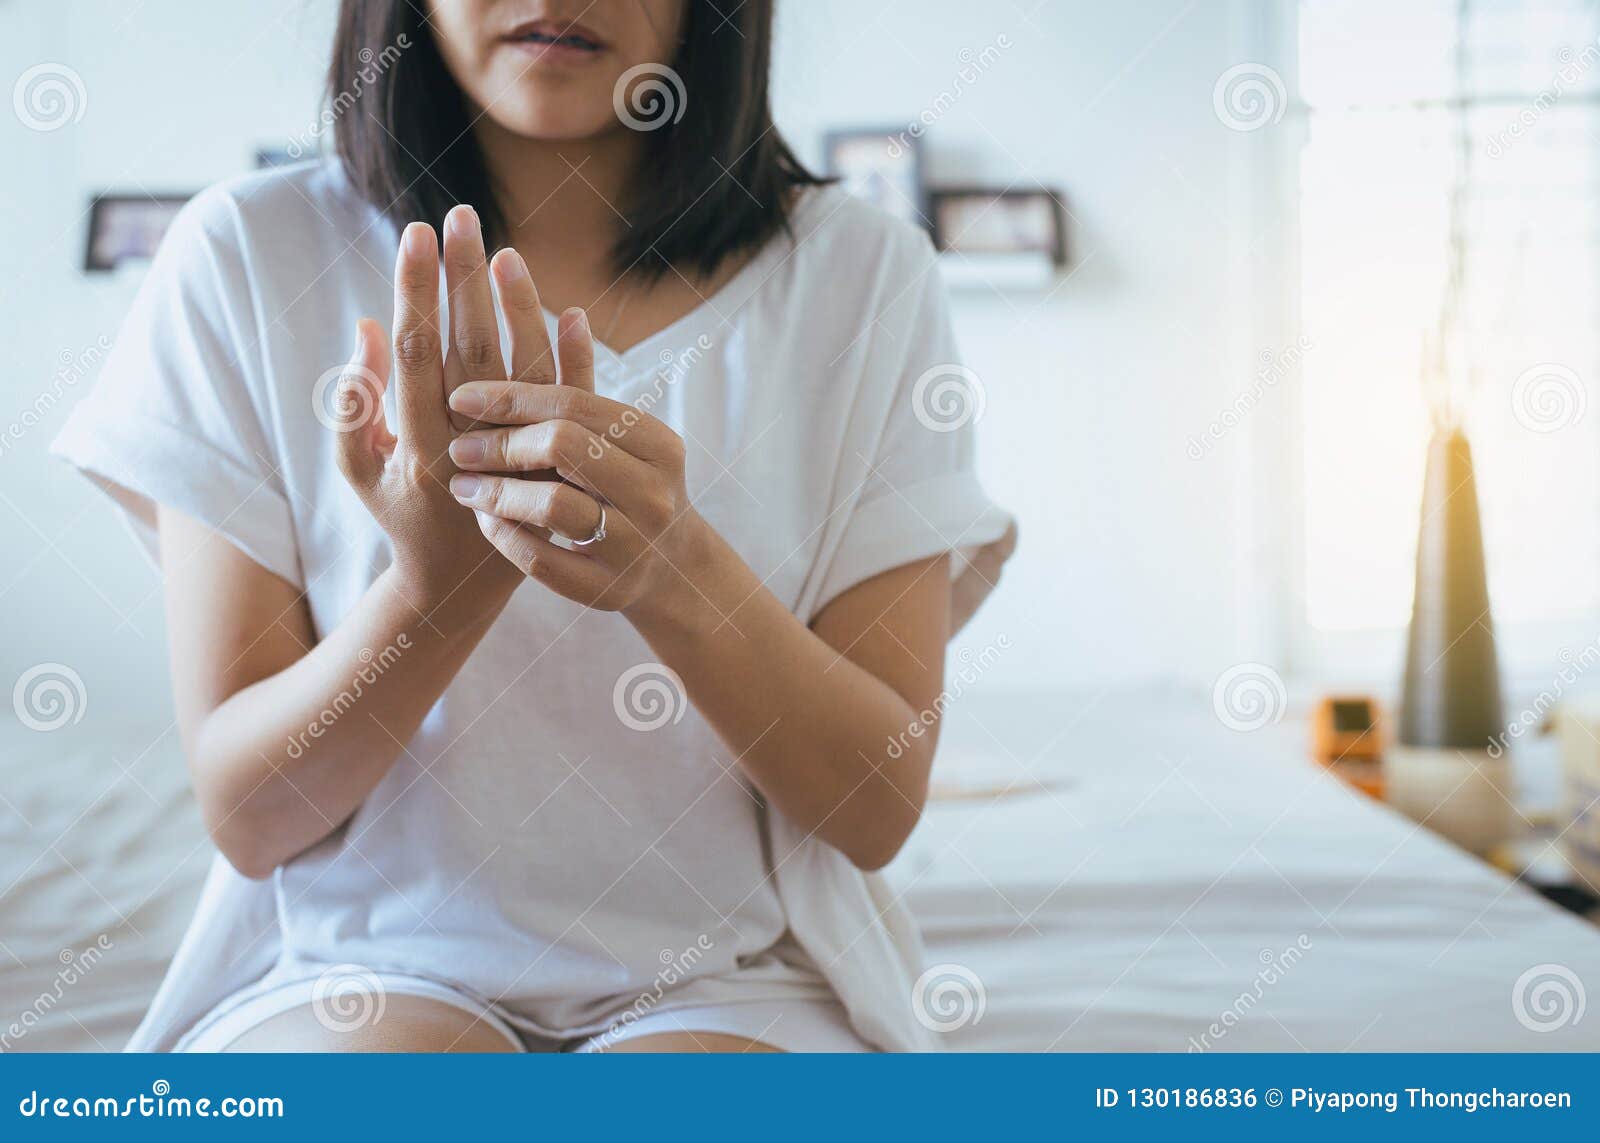 Woman Hands Checking Her Pulse with Fingers on Palm Stock Photo - Image